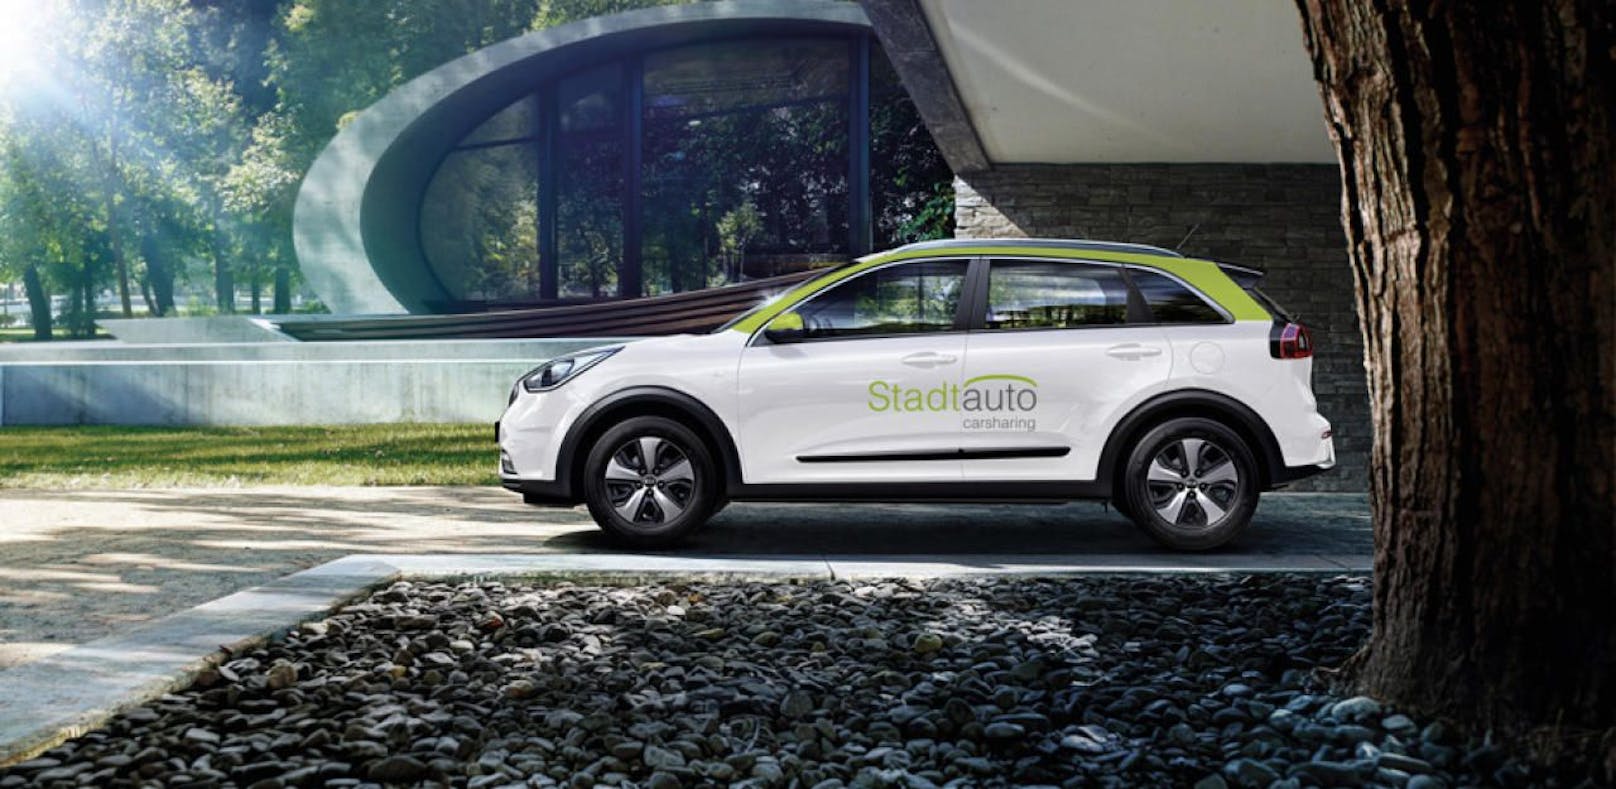 STADTAUTO by greenmove